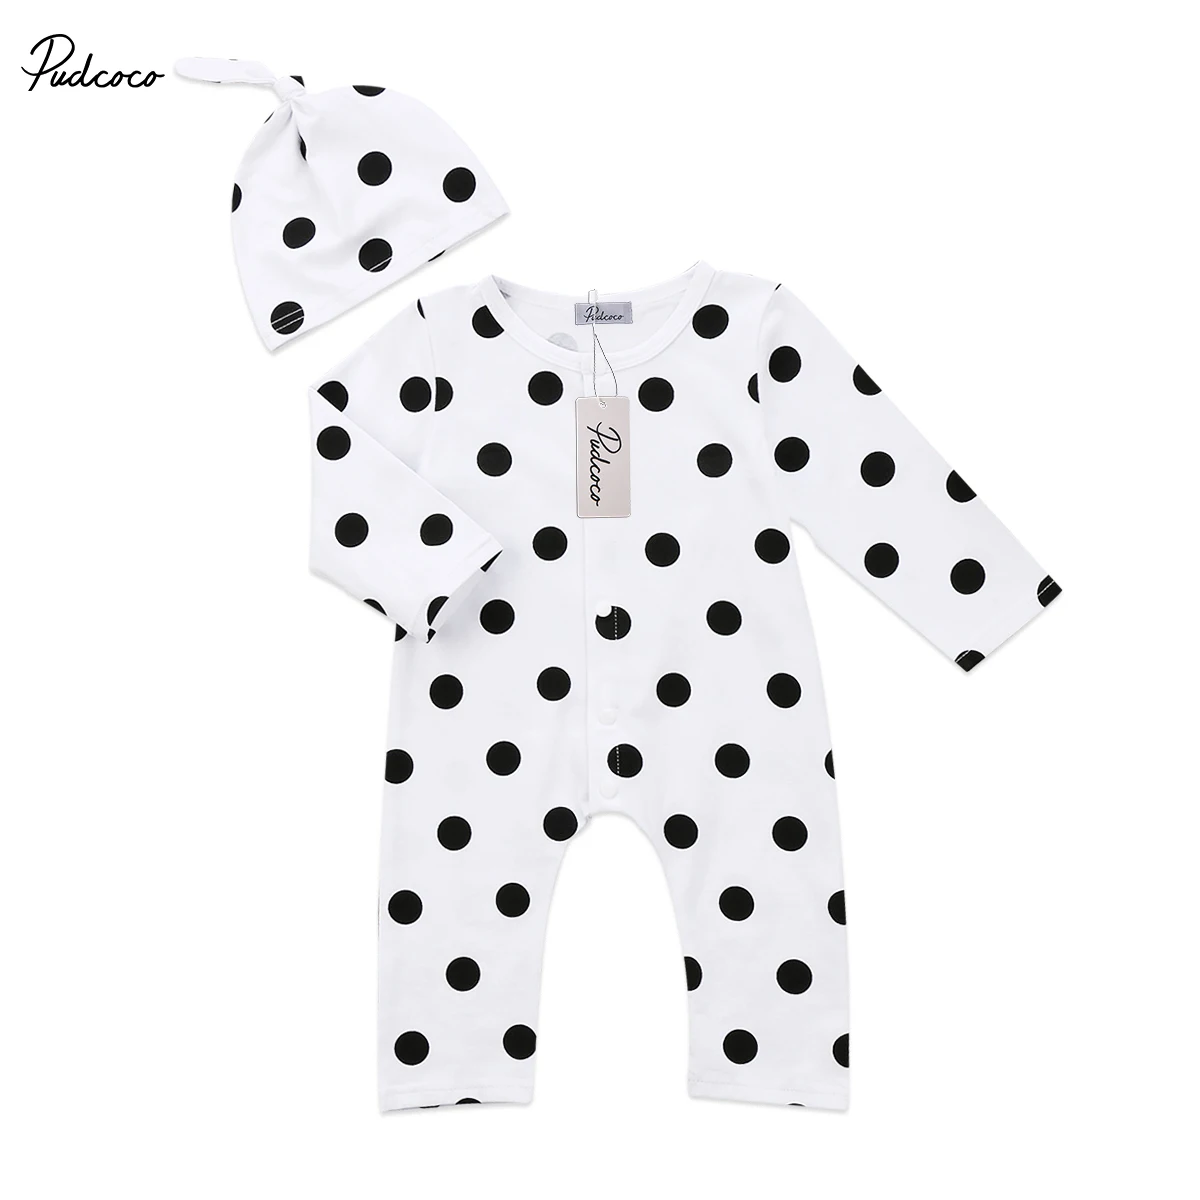 New Year's costumes for boys girls  Newborn Infant Baby Kids T-Shirt Tops Romper Long Sleeve Outfits Clothes Set baby clothes